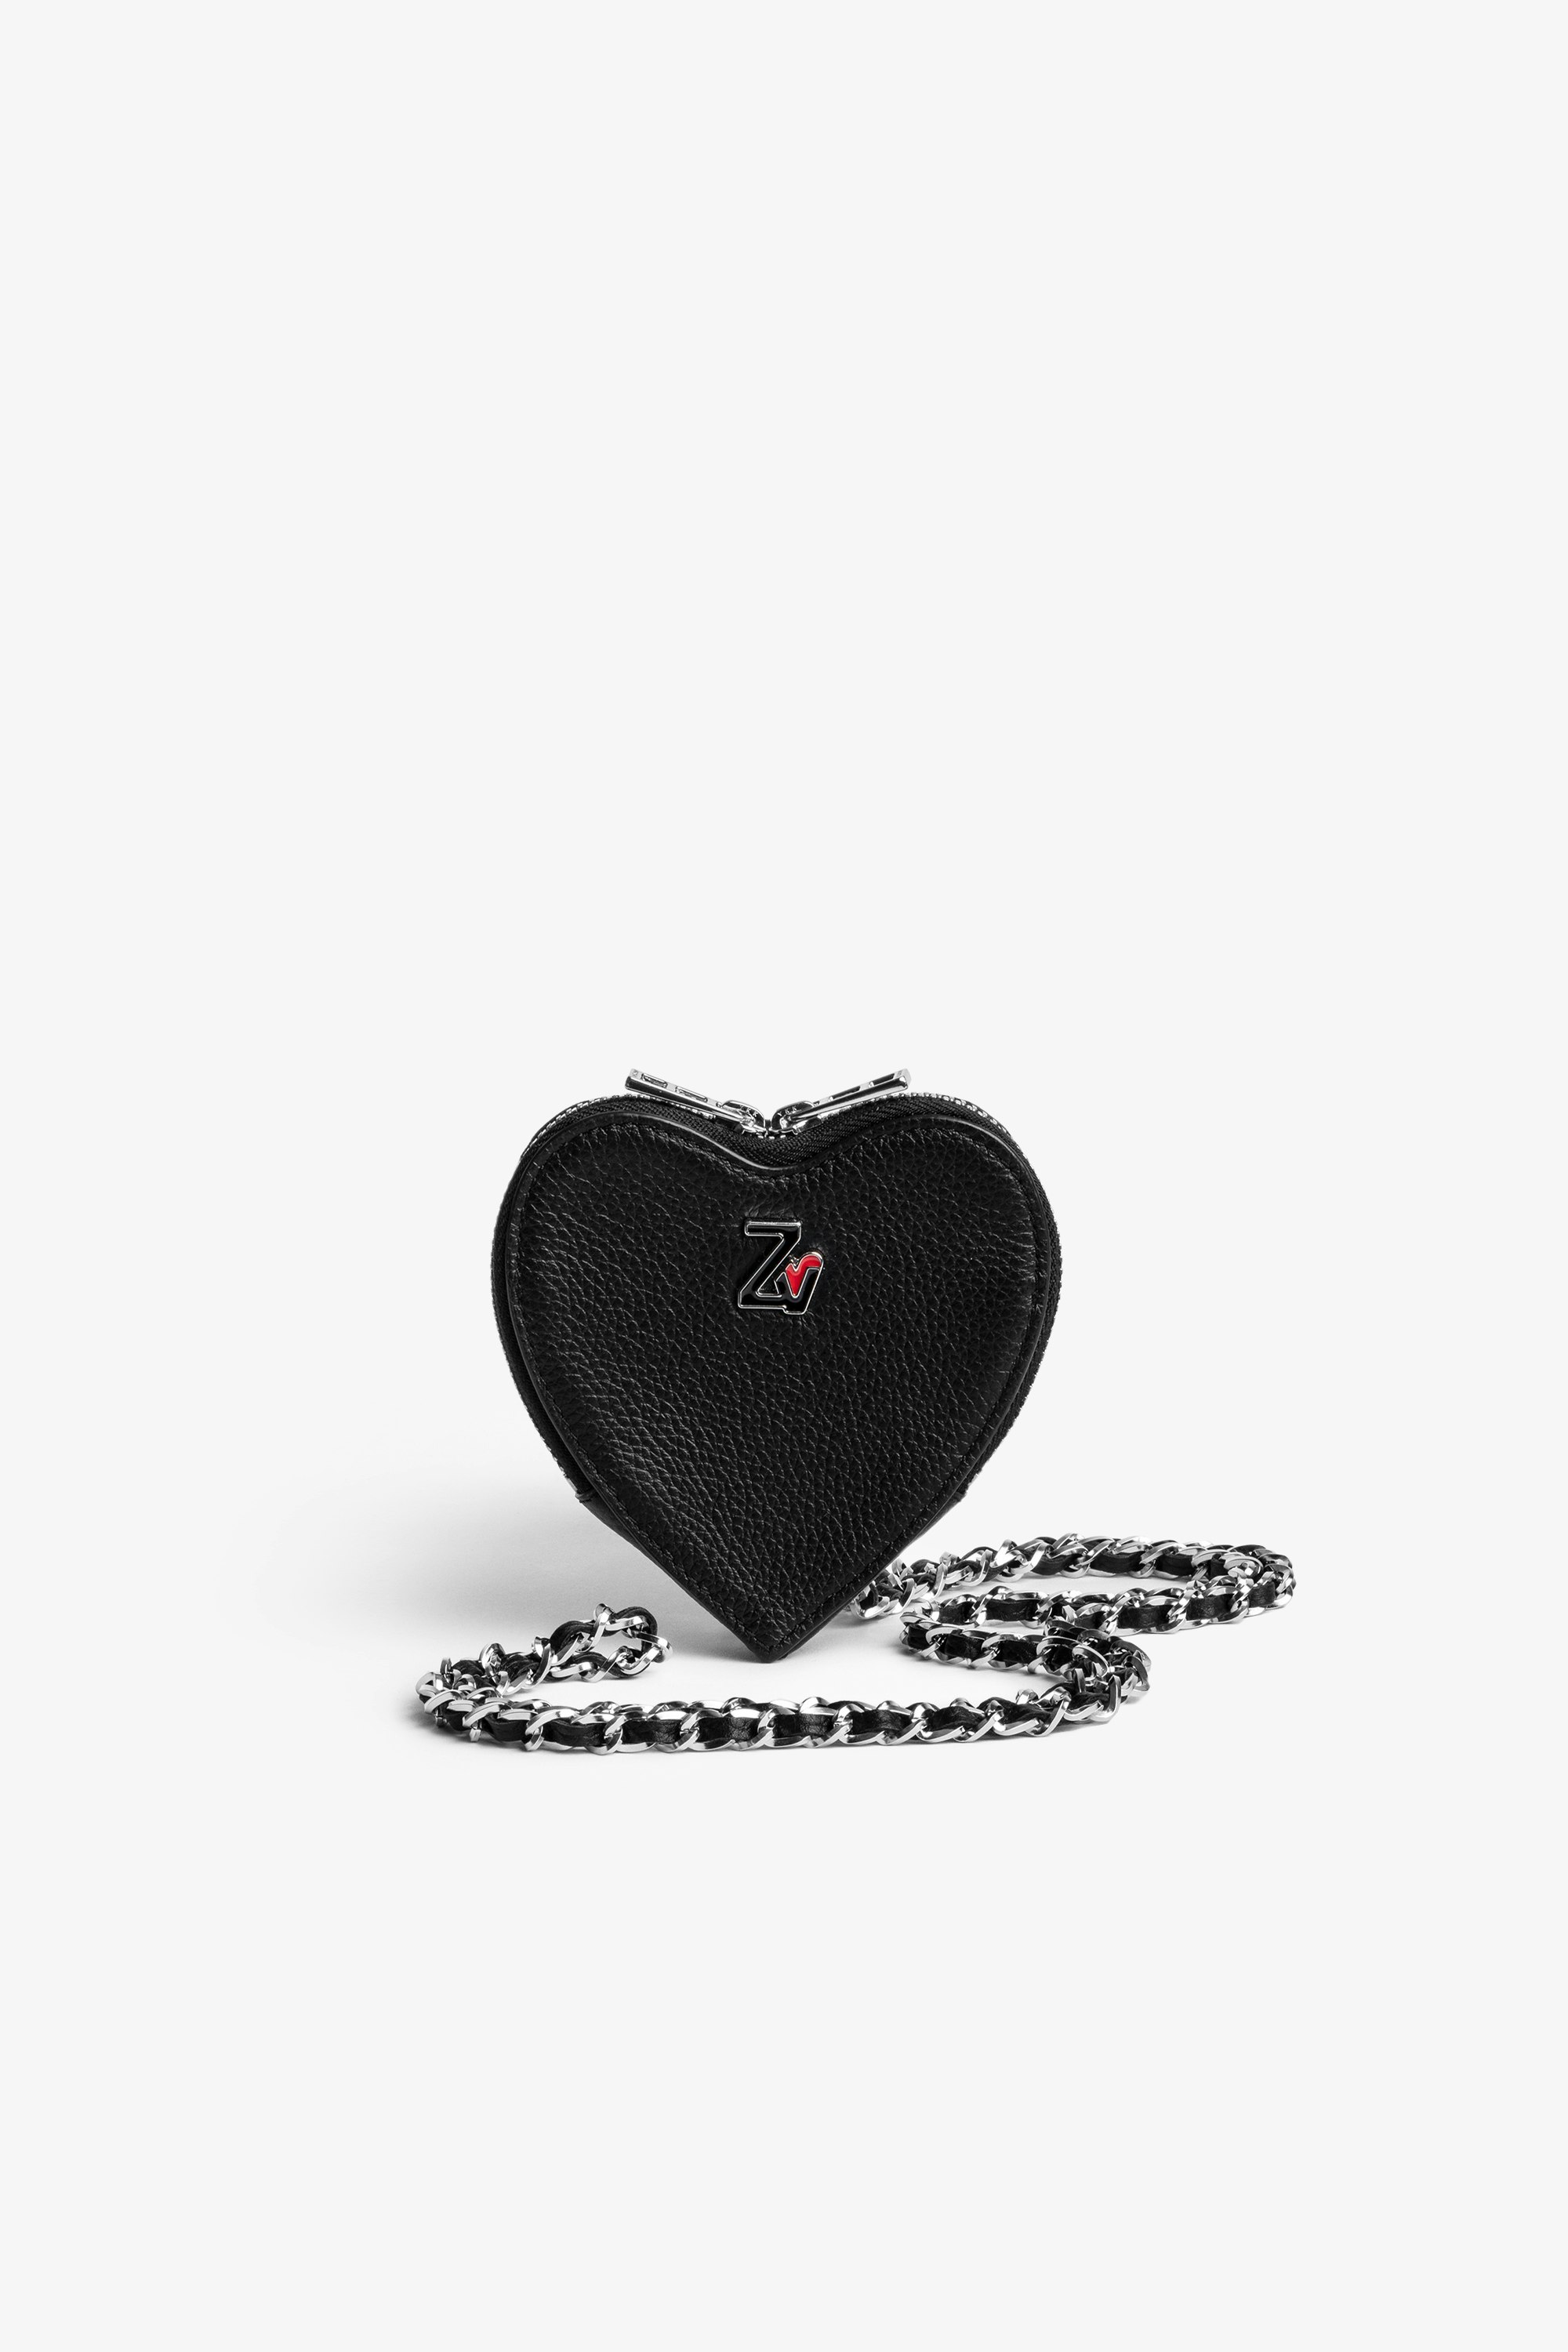 ZV Crush Le Coeur クラッチバッグ Women's heart clutch bag in black grained leather with zip closure and chain and leather shoulder strap